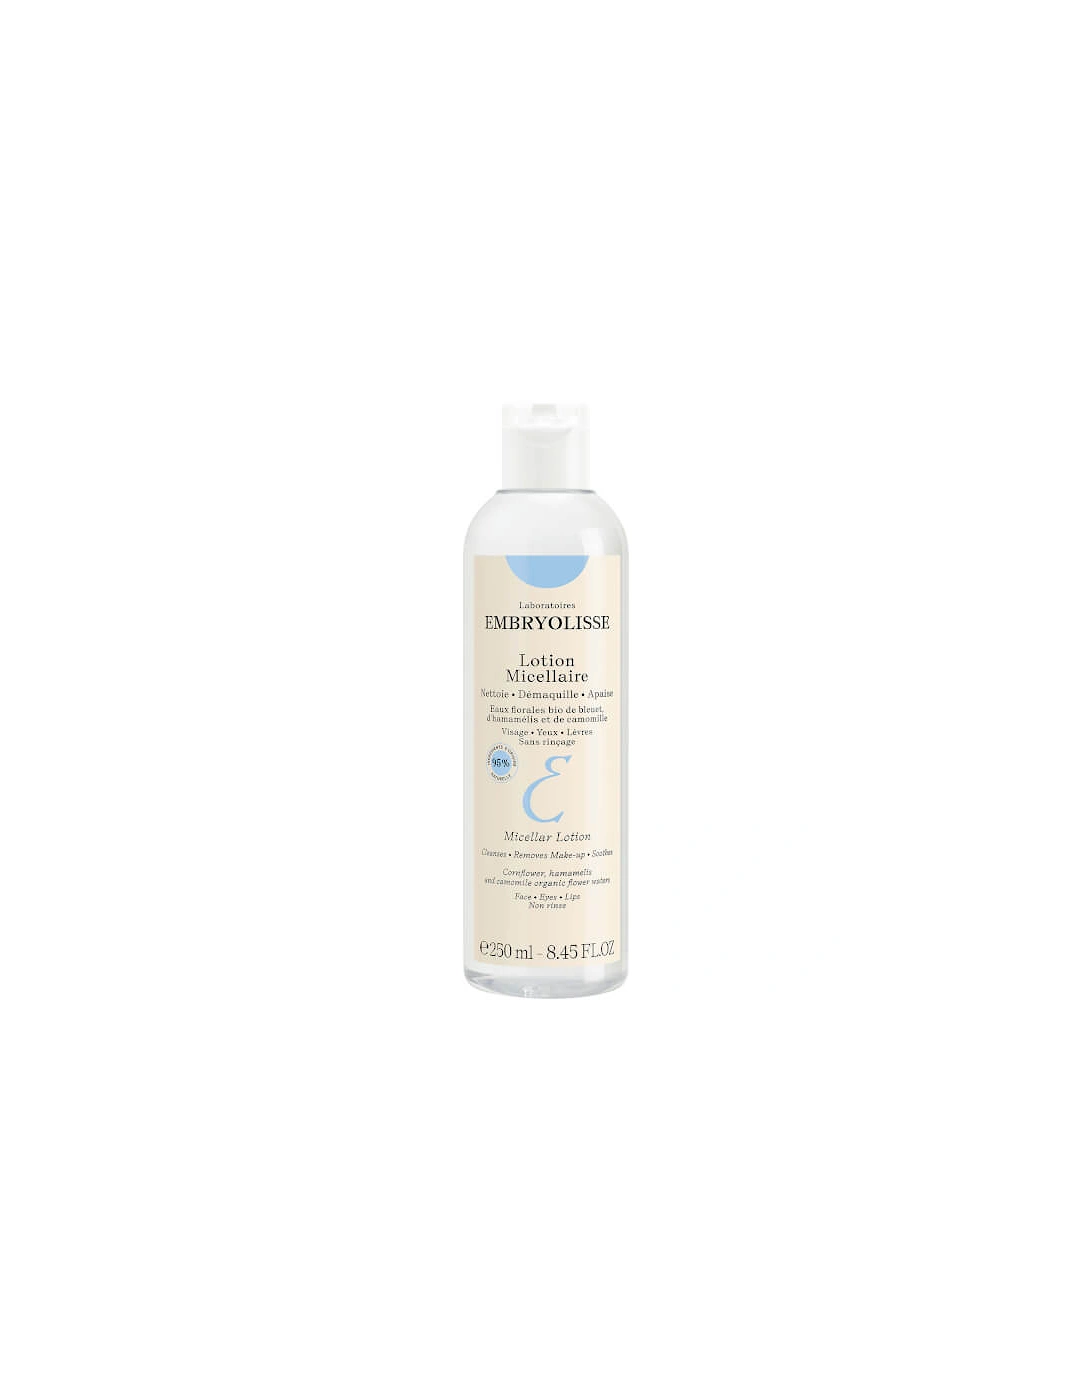 Makeup Remover Micellar Lotion 250ml - Embryolisse, 2 of 1